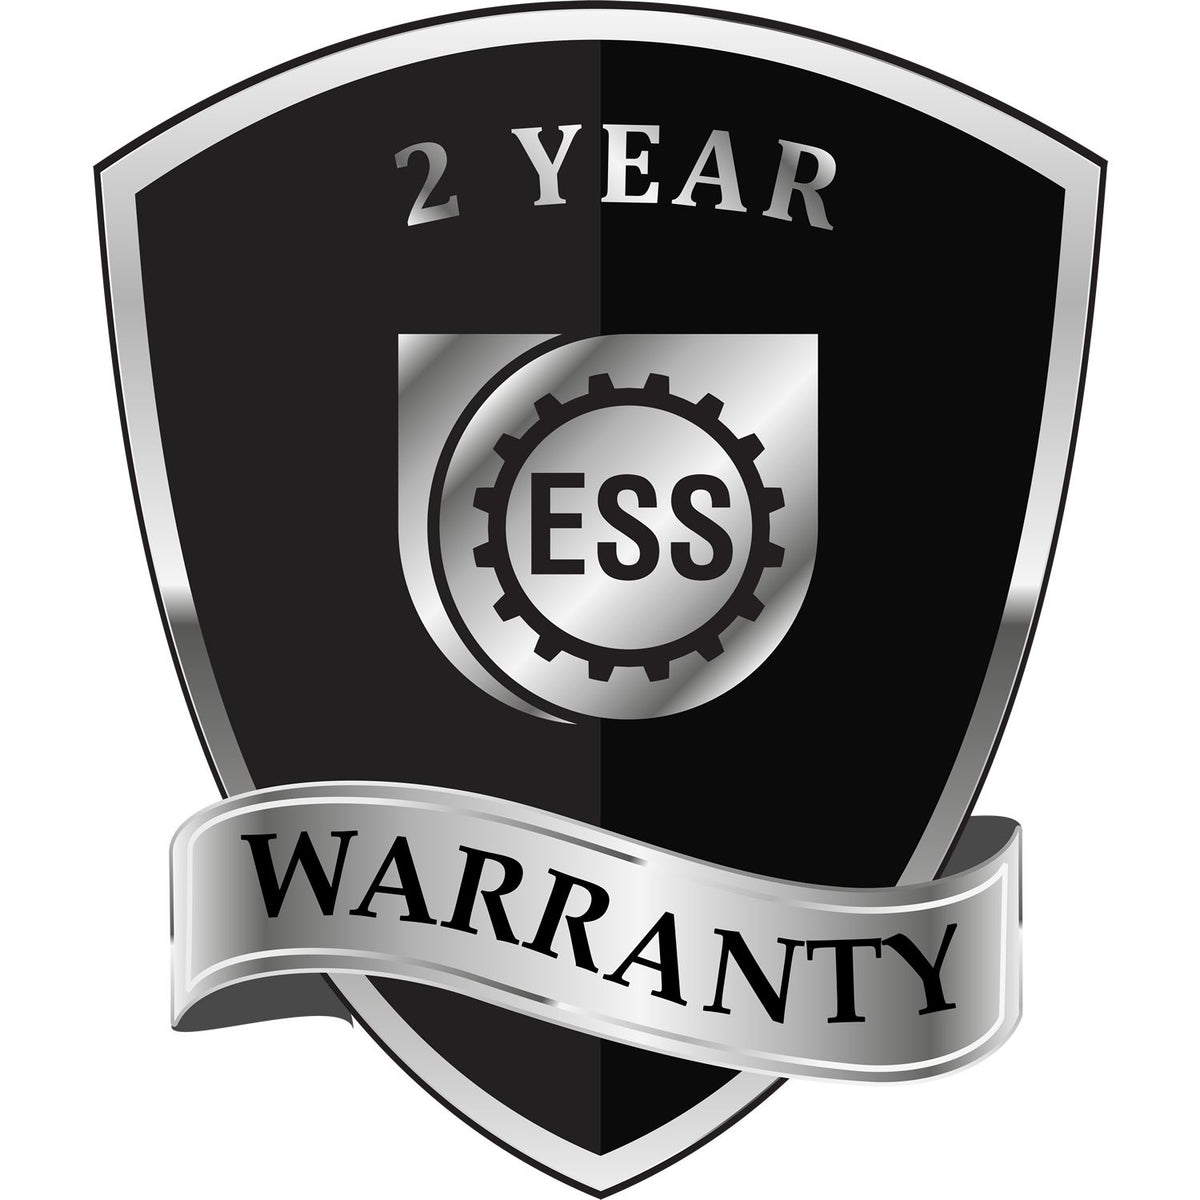 A badge or emblem showing a warranty icon for the Soft South Dakota Professional Engineer Seal